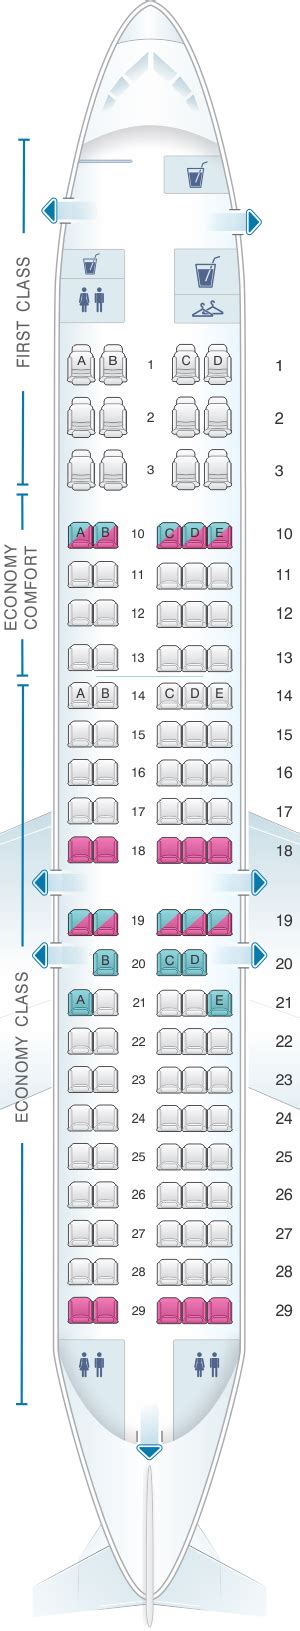 11. Check out our Delta Airlines seat maps - the most detailed, up to date, and popular Delta Airlines seating charts and cabin layouts available.. 